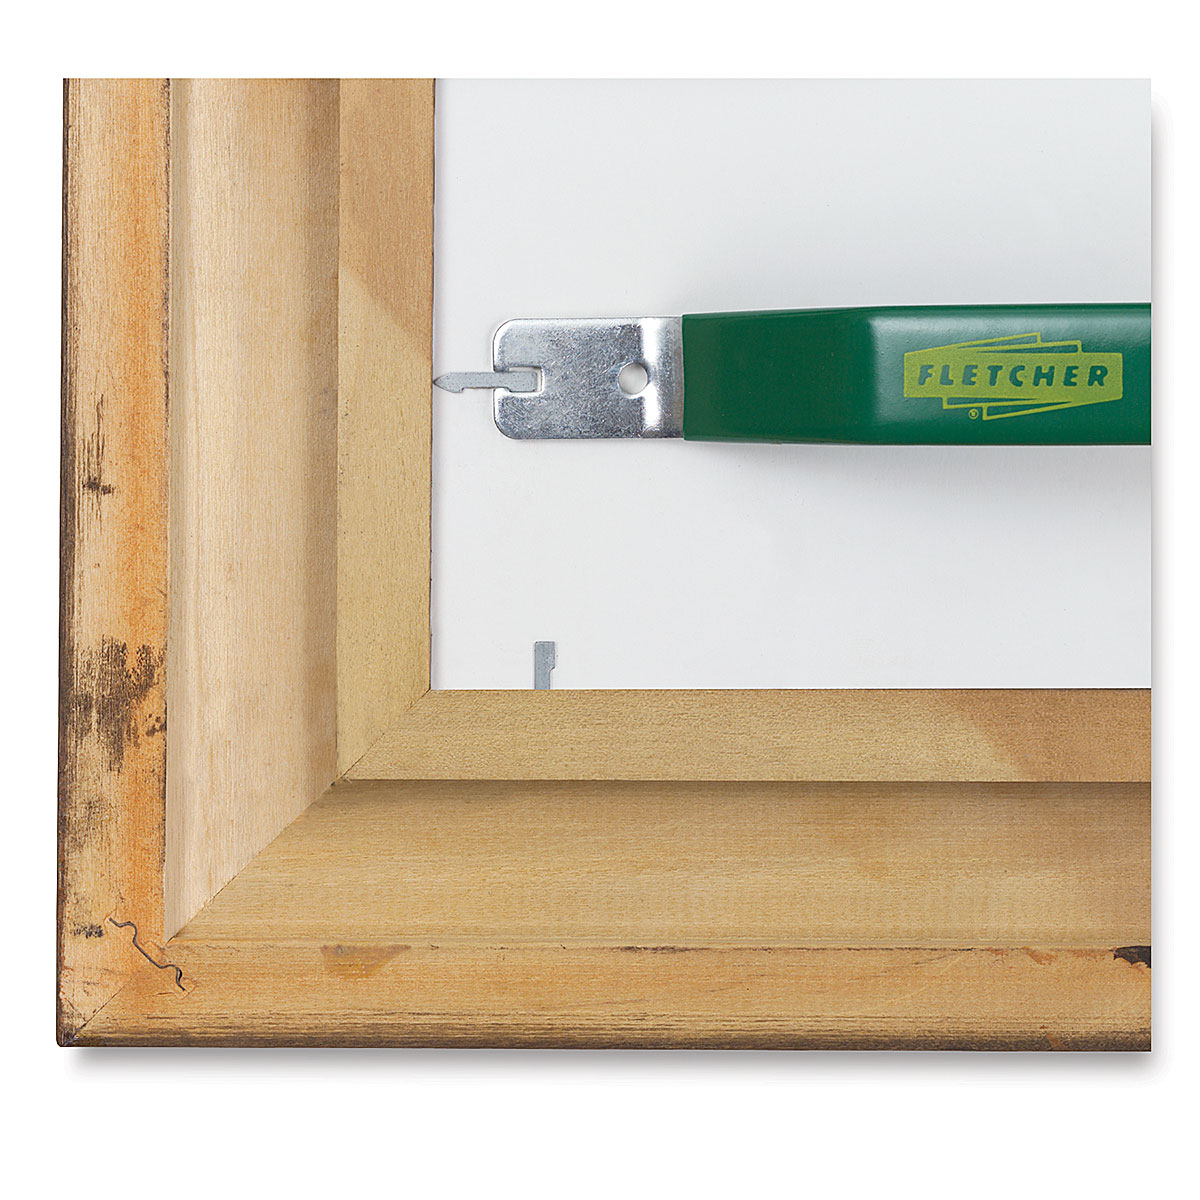 Flexible Points for Picture-Framing Point Driver - Lee Valley Tools